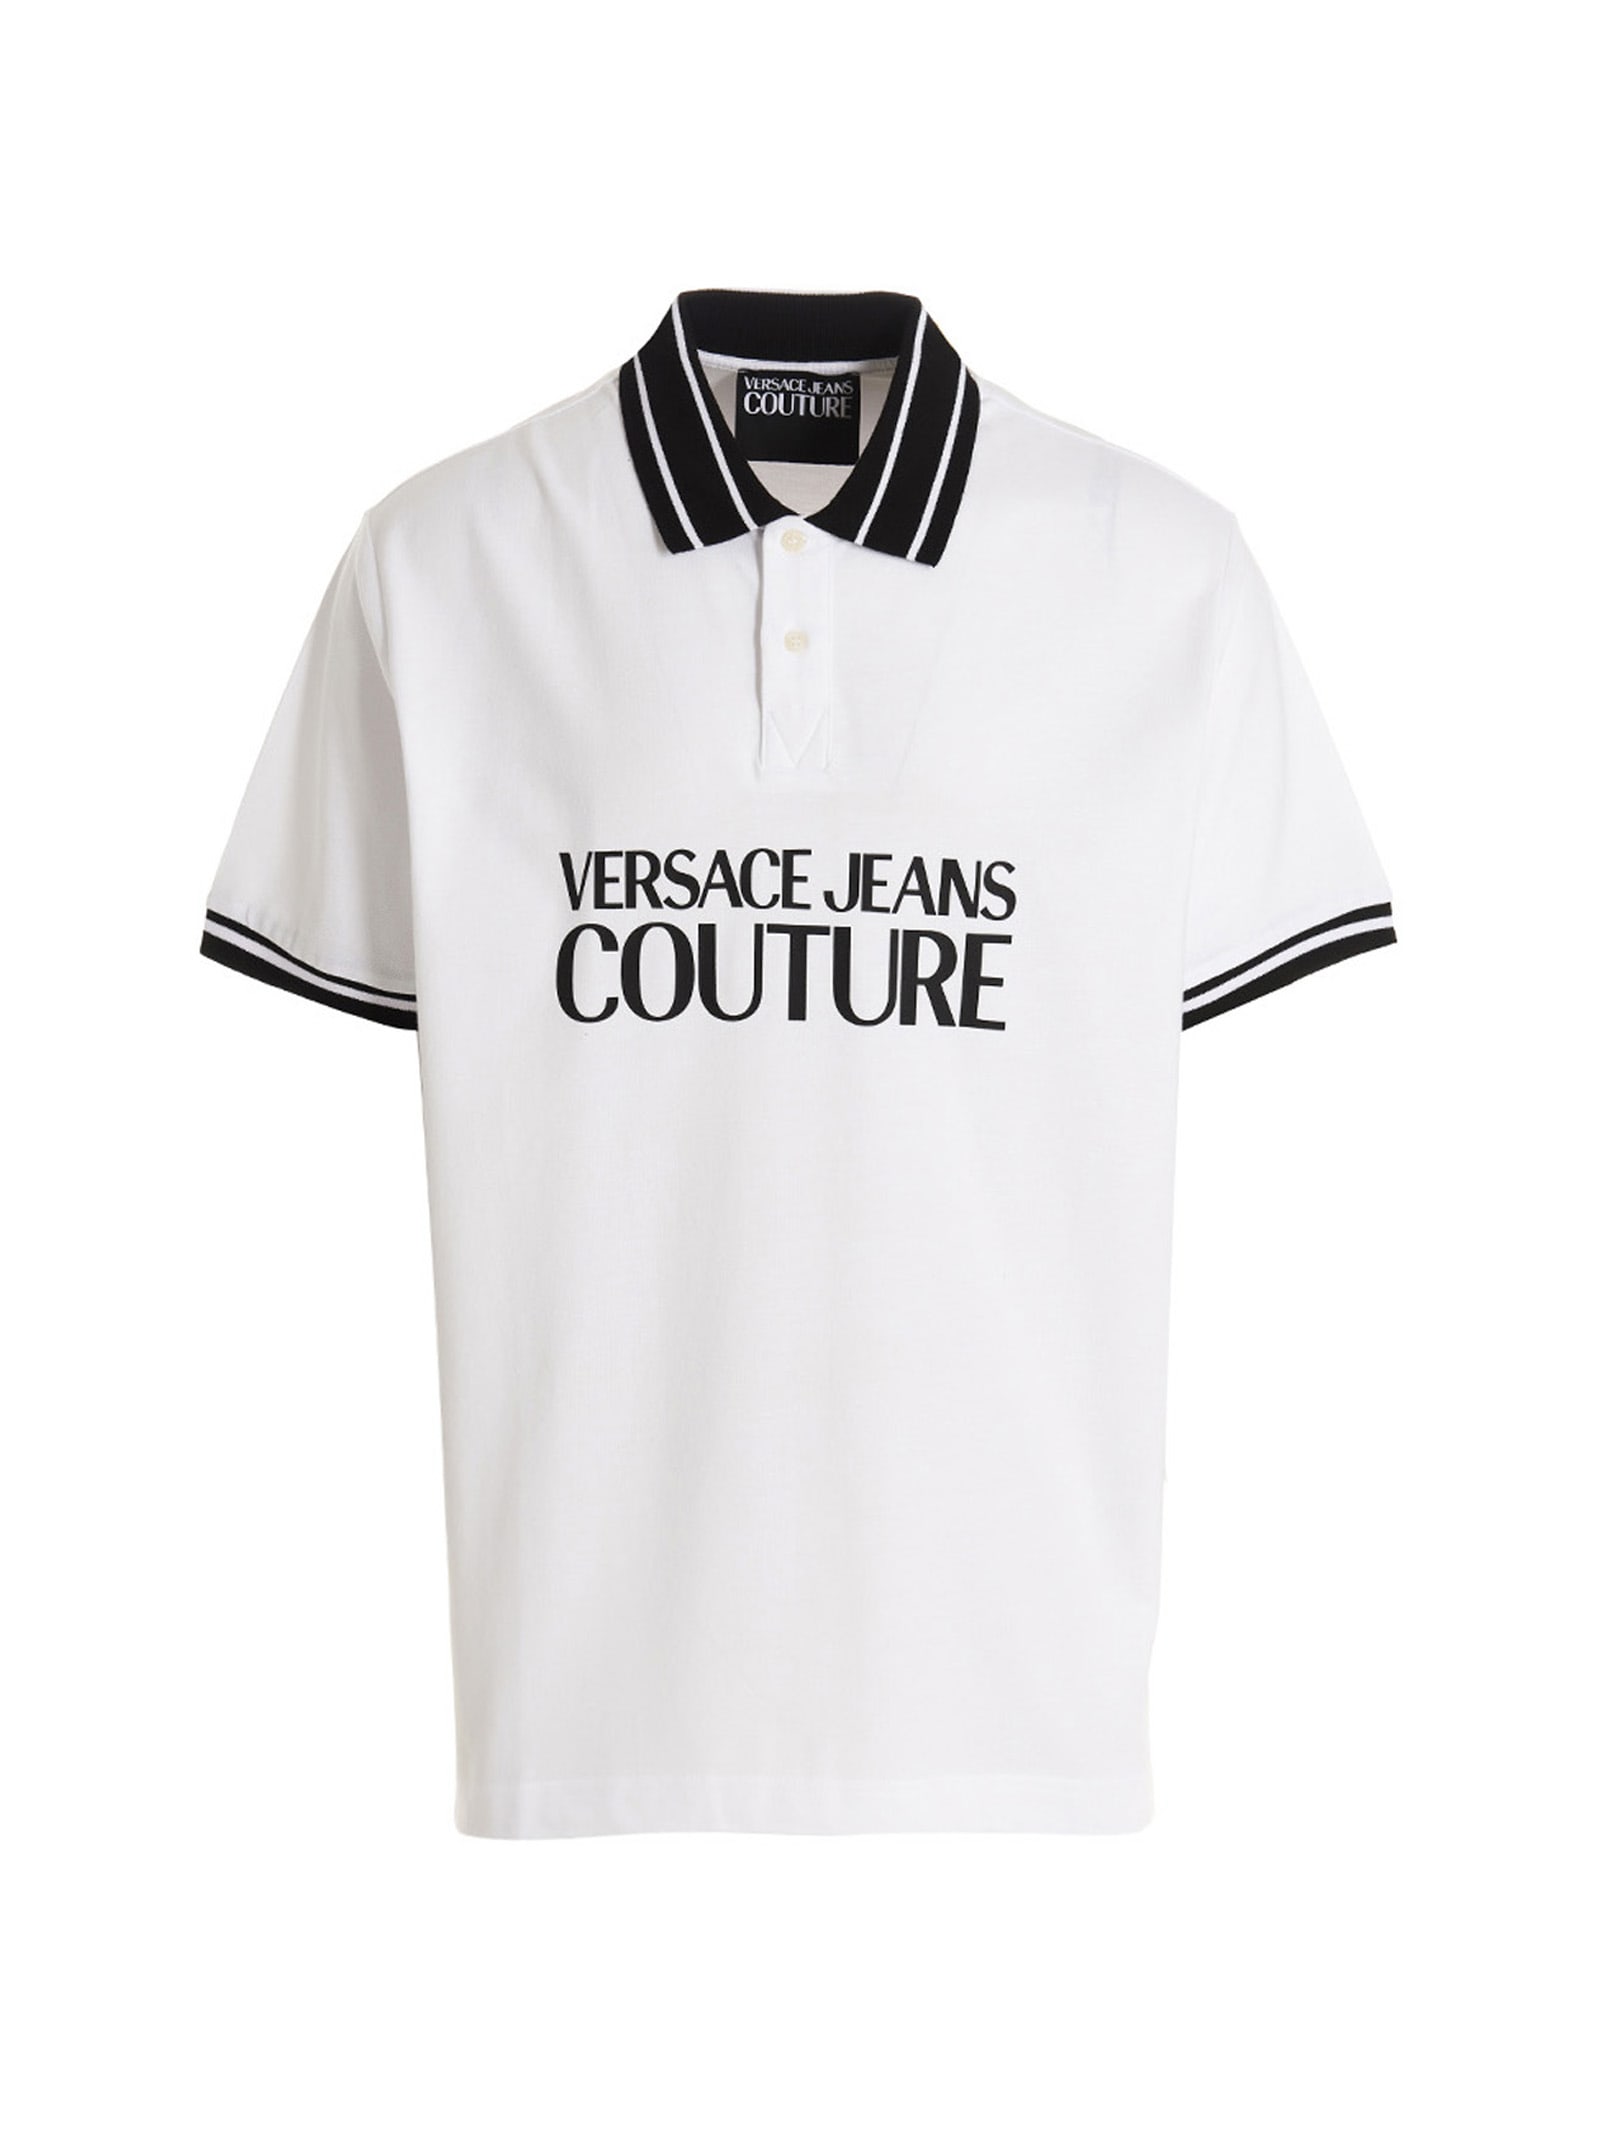 VERSACE JEANS COUTURE LOGO PRINT POLO SHIRT